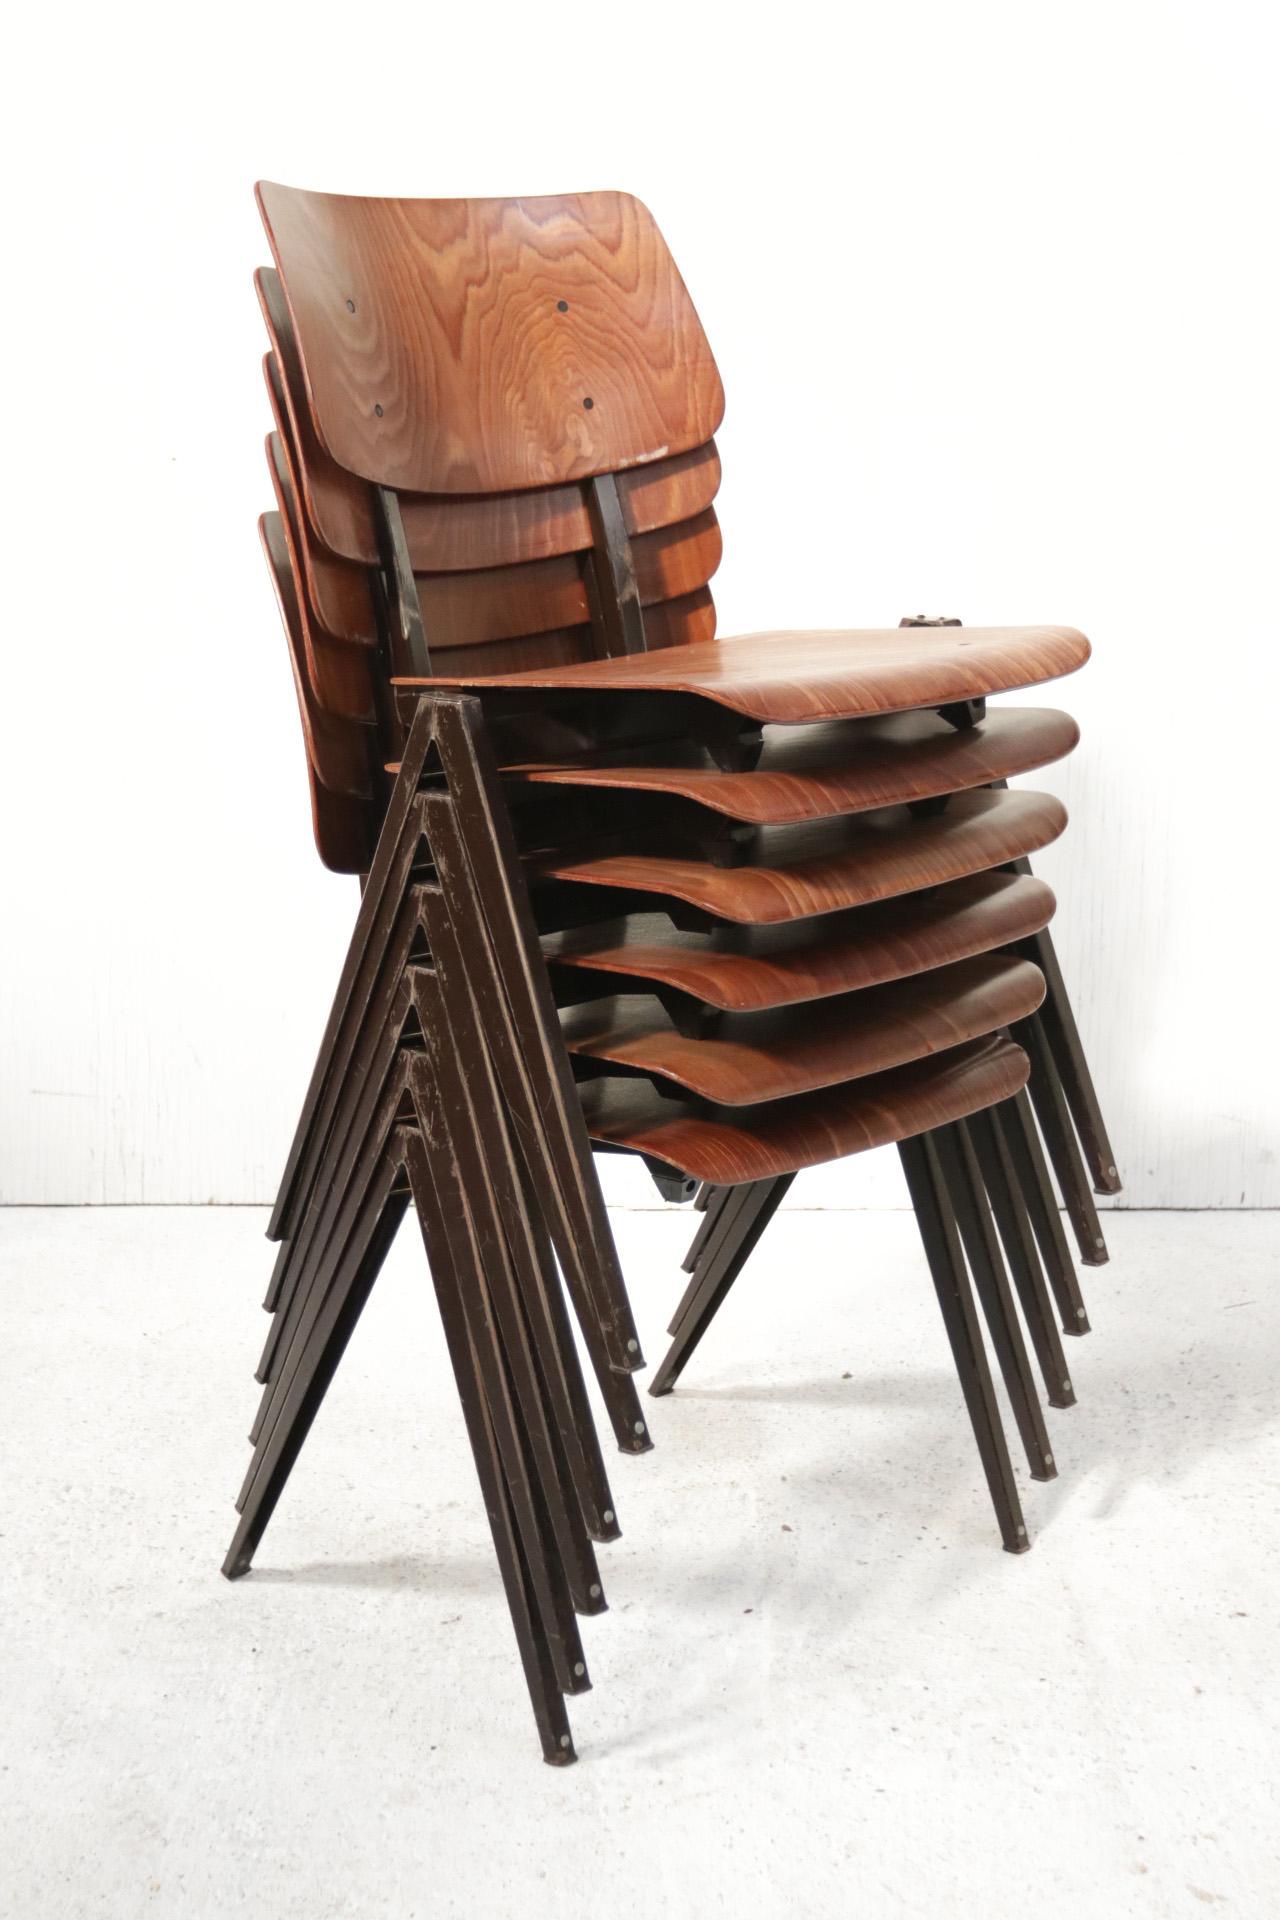 10 x Dutch Industrial Design Prouve Style School Chairs S21 Compas Galvanitas In Good Condition For Sale In Boven Leeuwen, NL